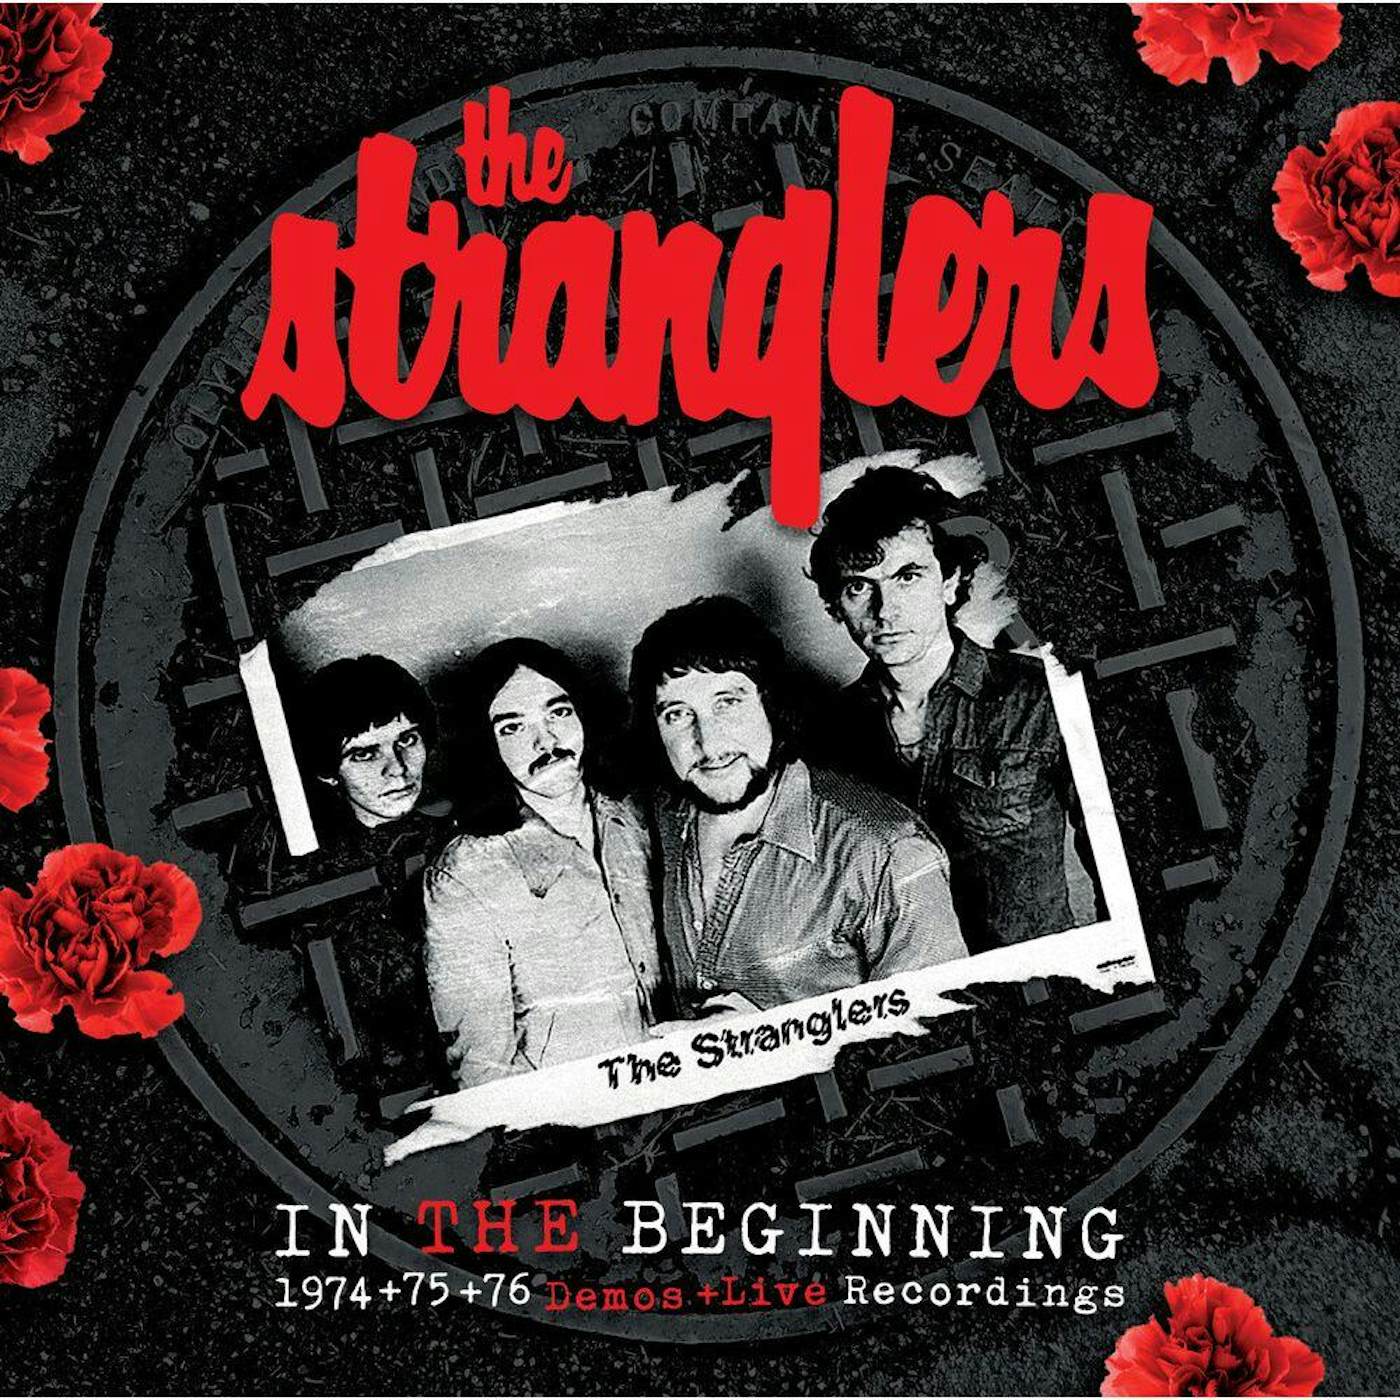 The Stranglers IN THE BEGINNING 1974 75 76 DEMOS + LIVE RECORDING CD